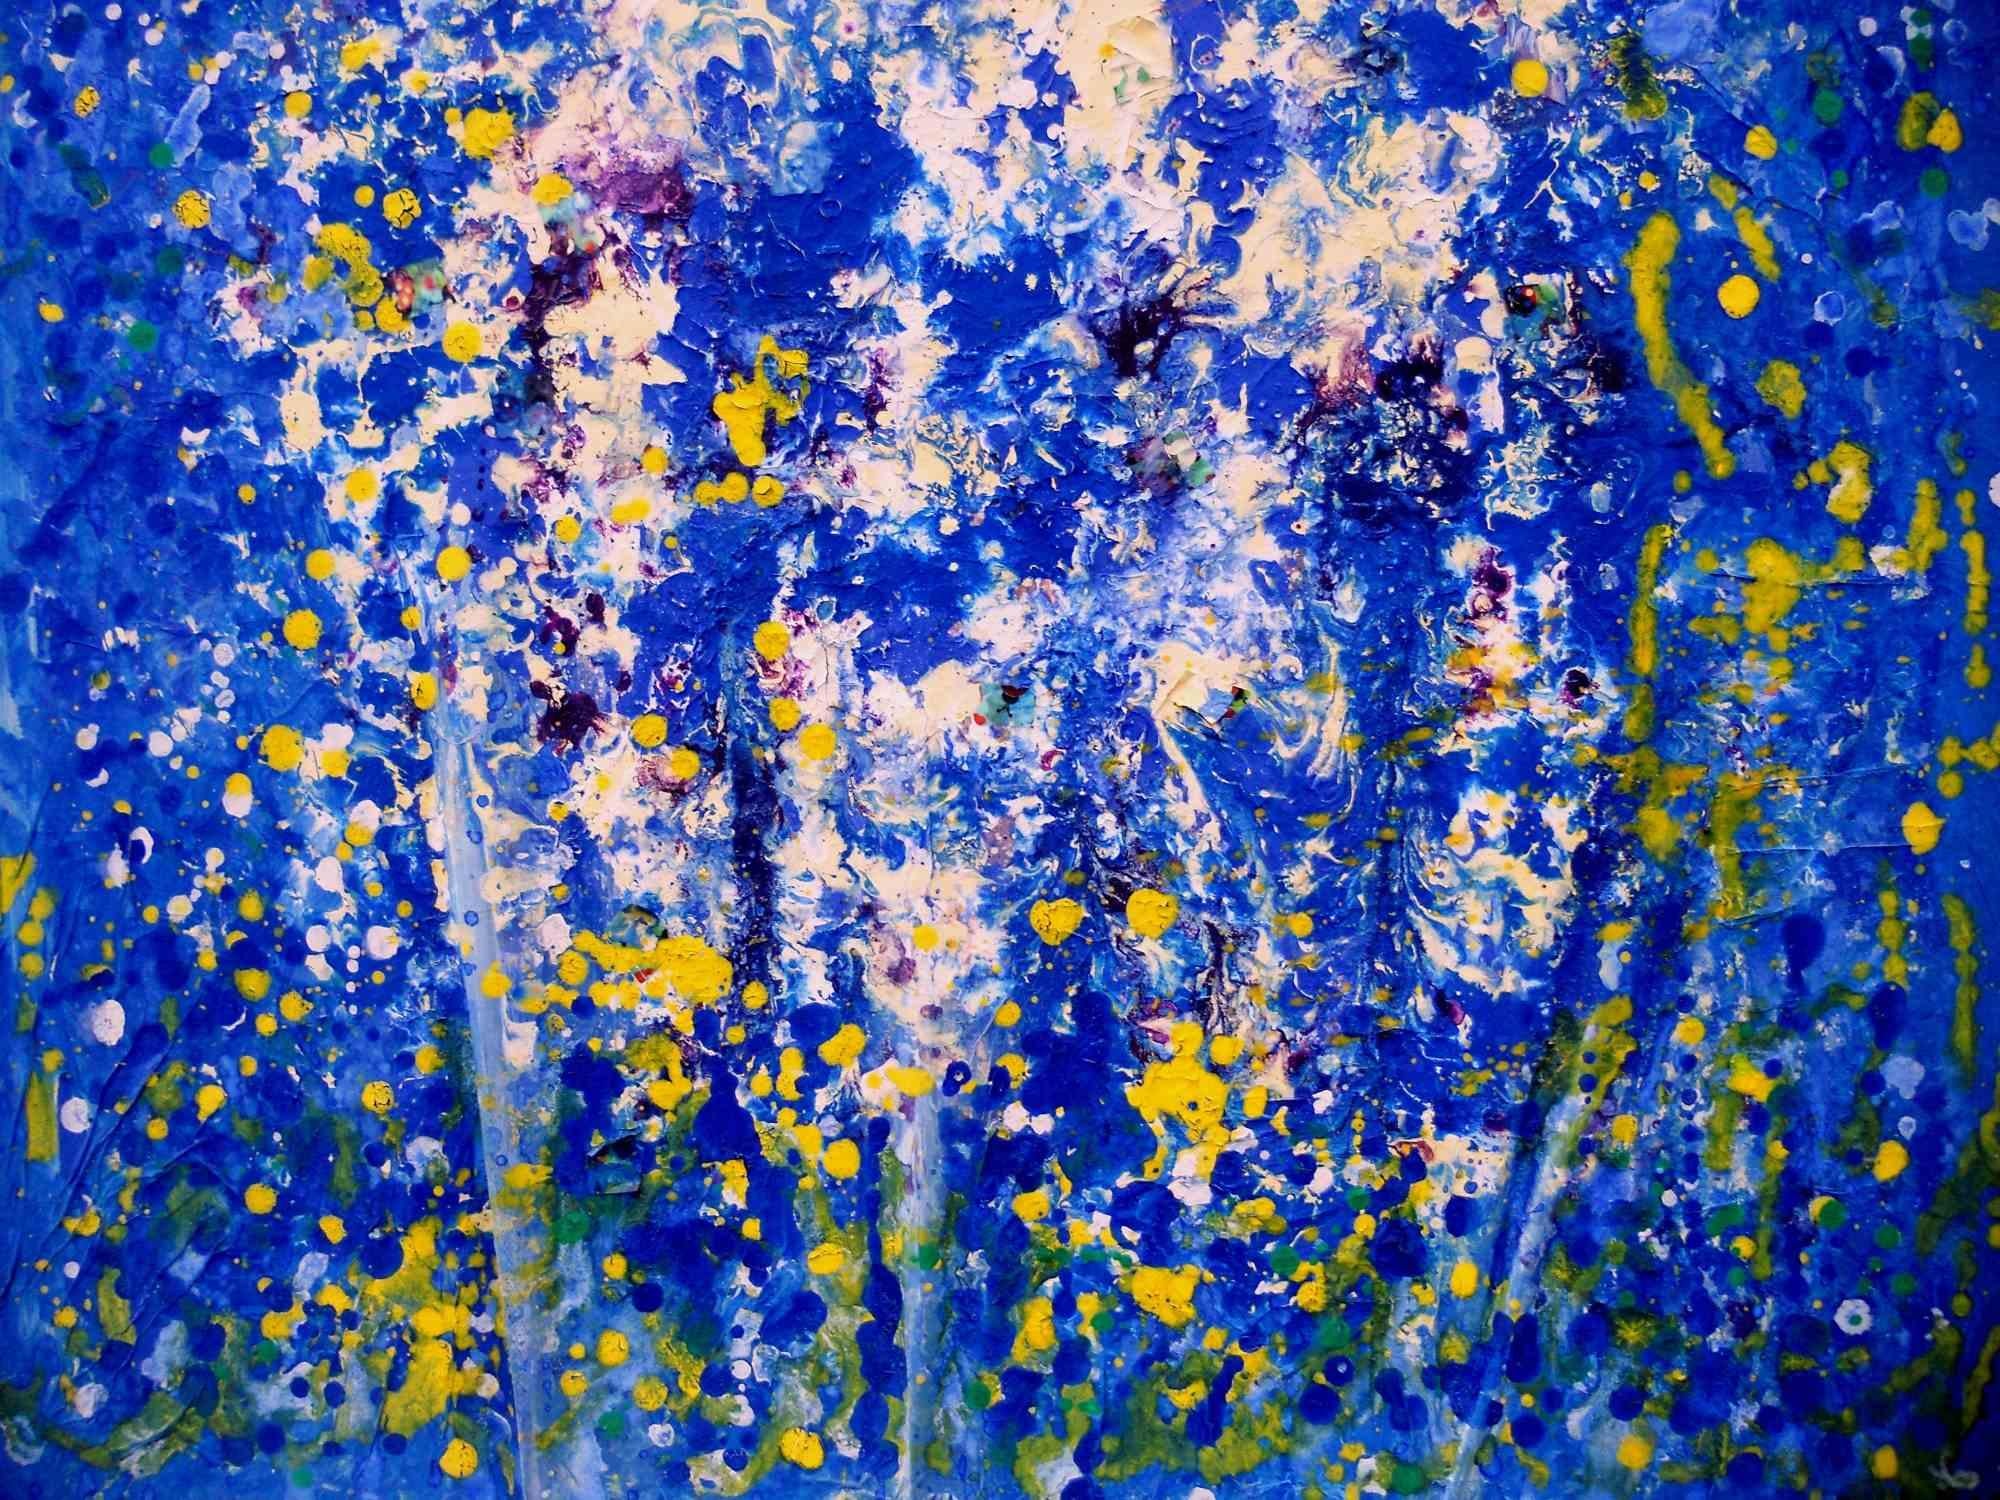 Dripping for Color Freedom is one of the best works of the artist Giuseppe Zumbolo. It is made on canvas, painted in acrylic in 2016.

The work is made with the dripping technique, with a dominance of blue and yellow. The canvas is placed on the